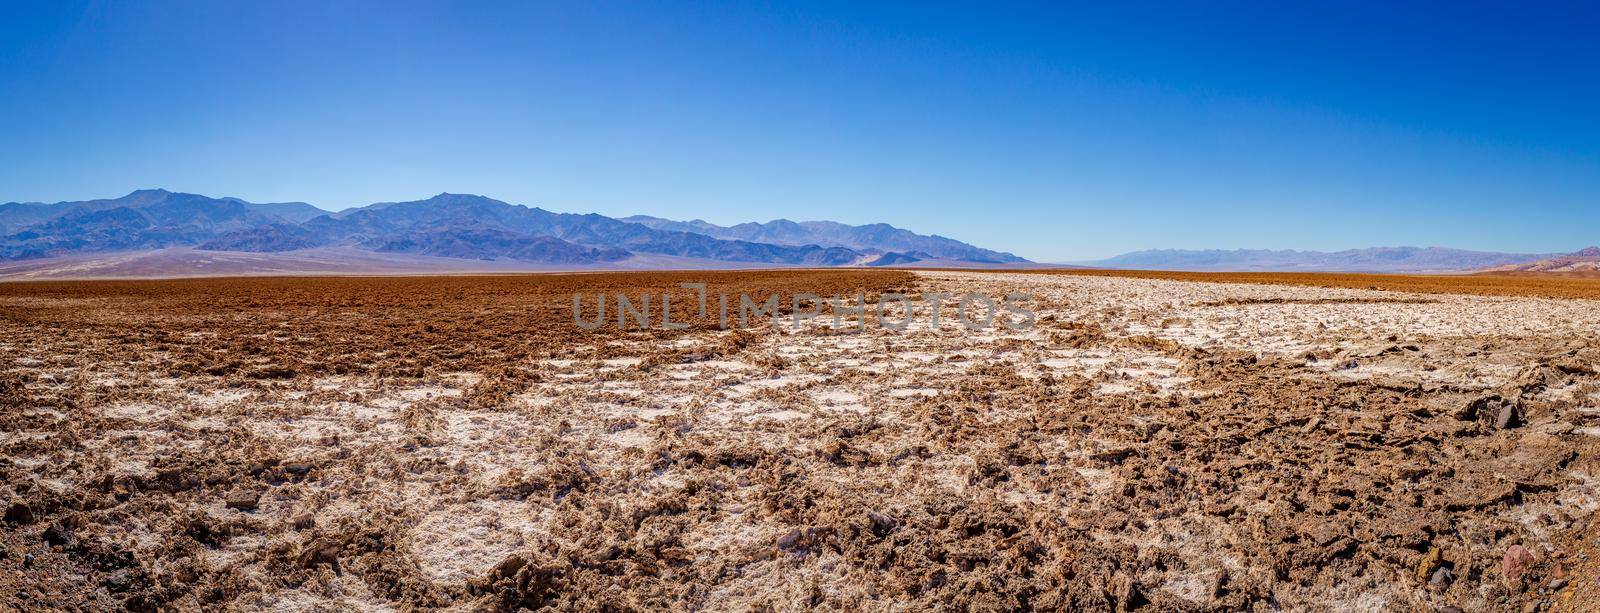 Devil's golf course in Death Valley National Park, with rough surface some covered by white salt